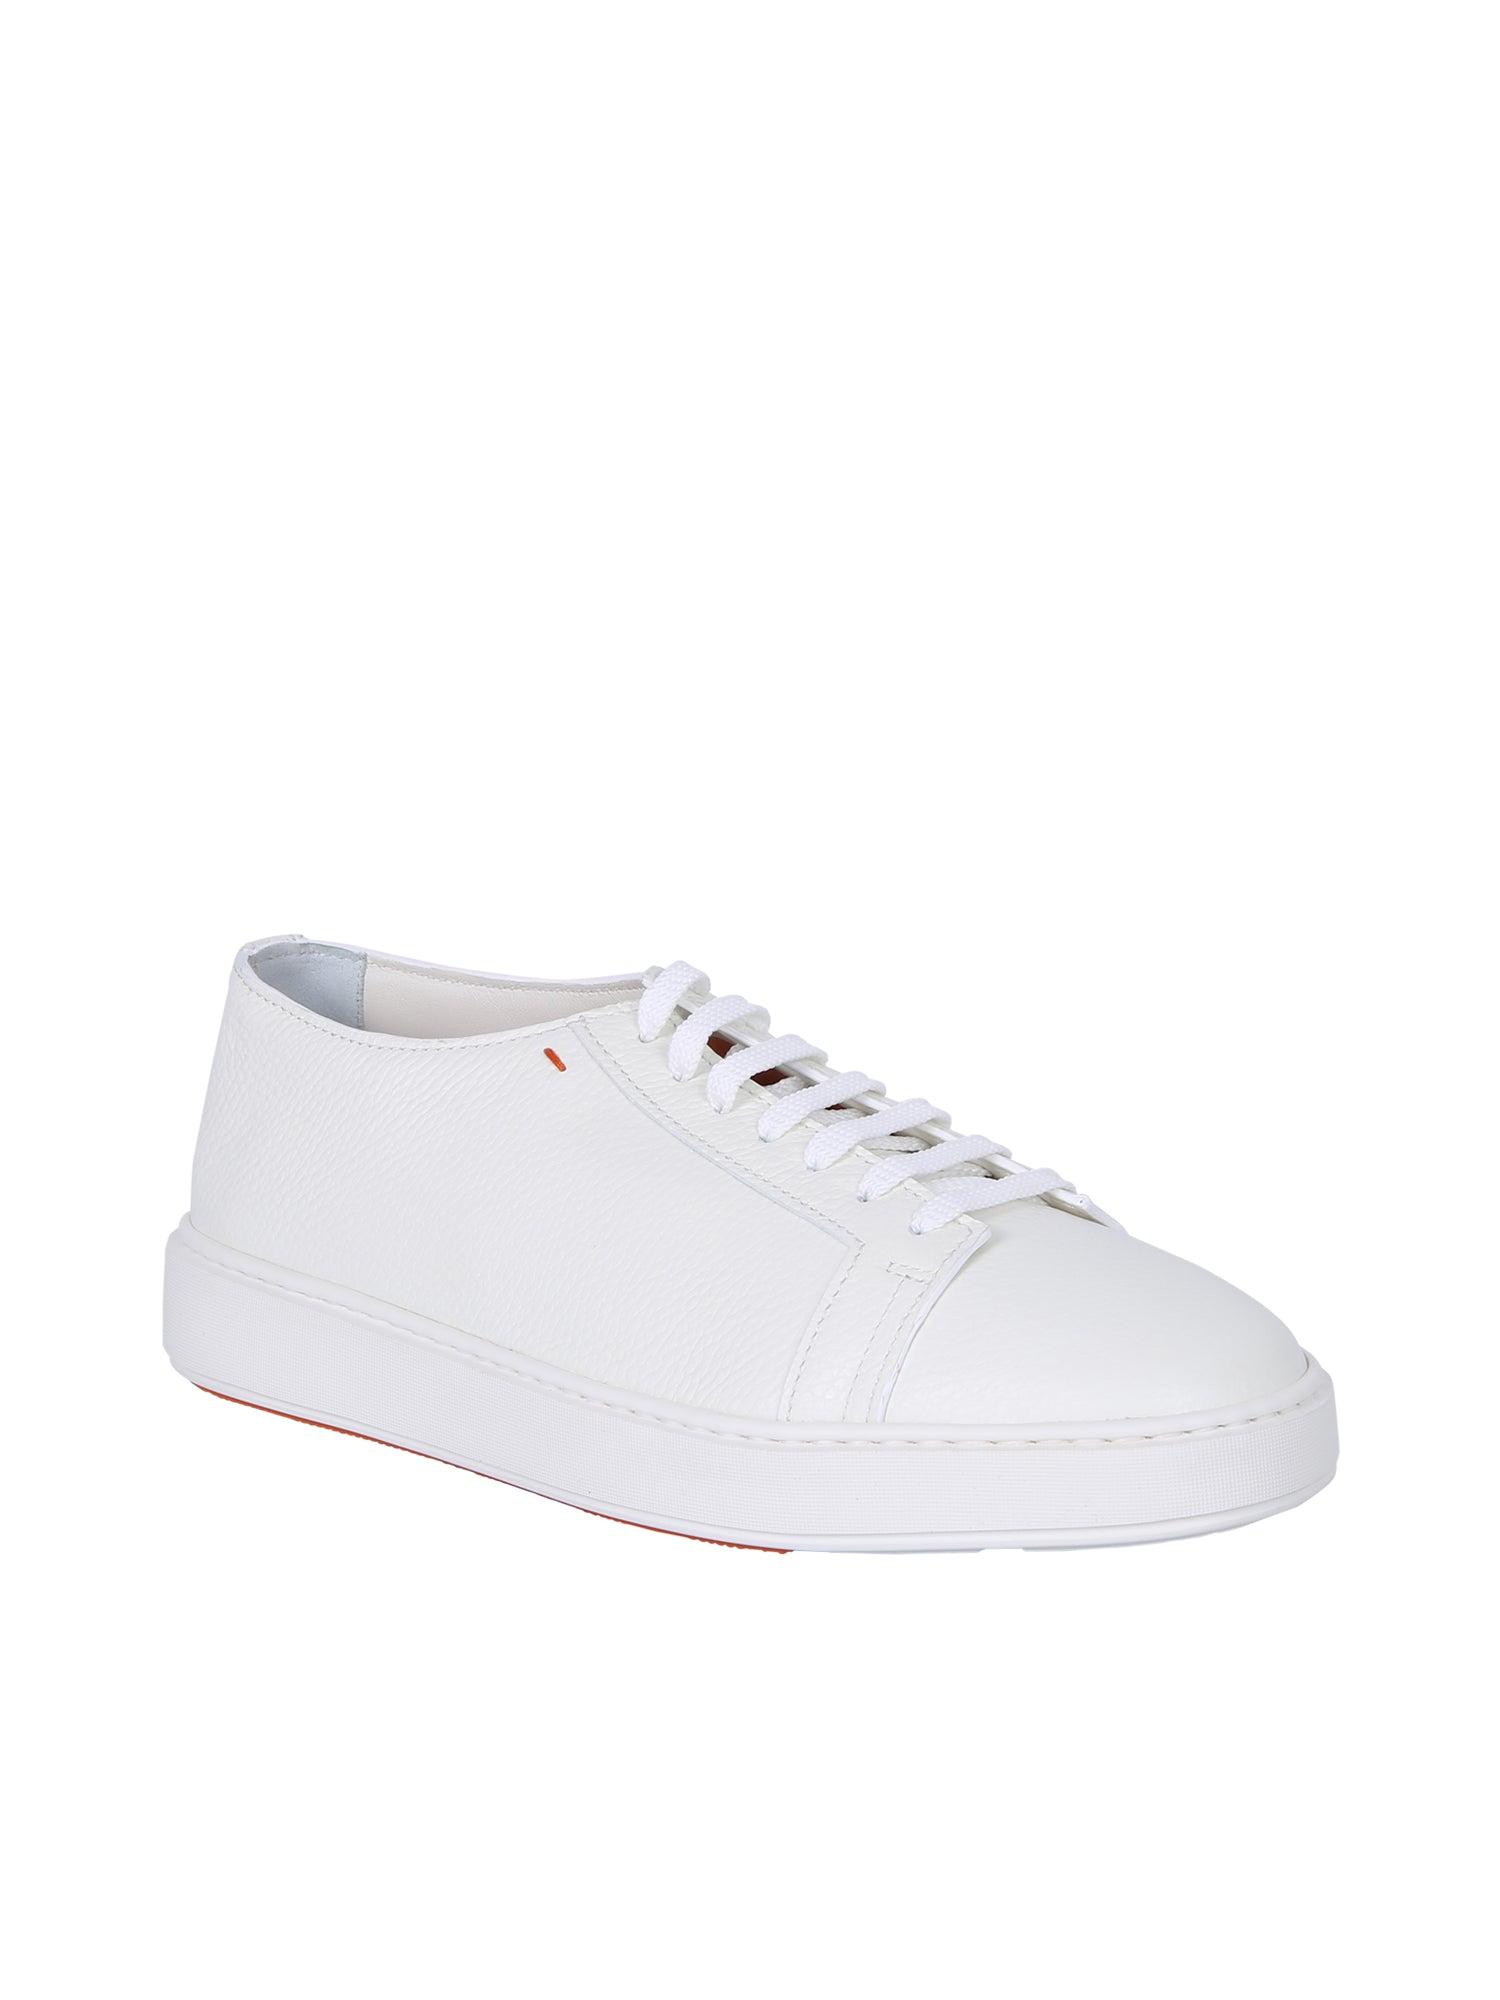 Santoni Cleanic Leather Sneakers in White for Men | Lyst